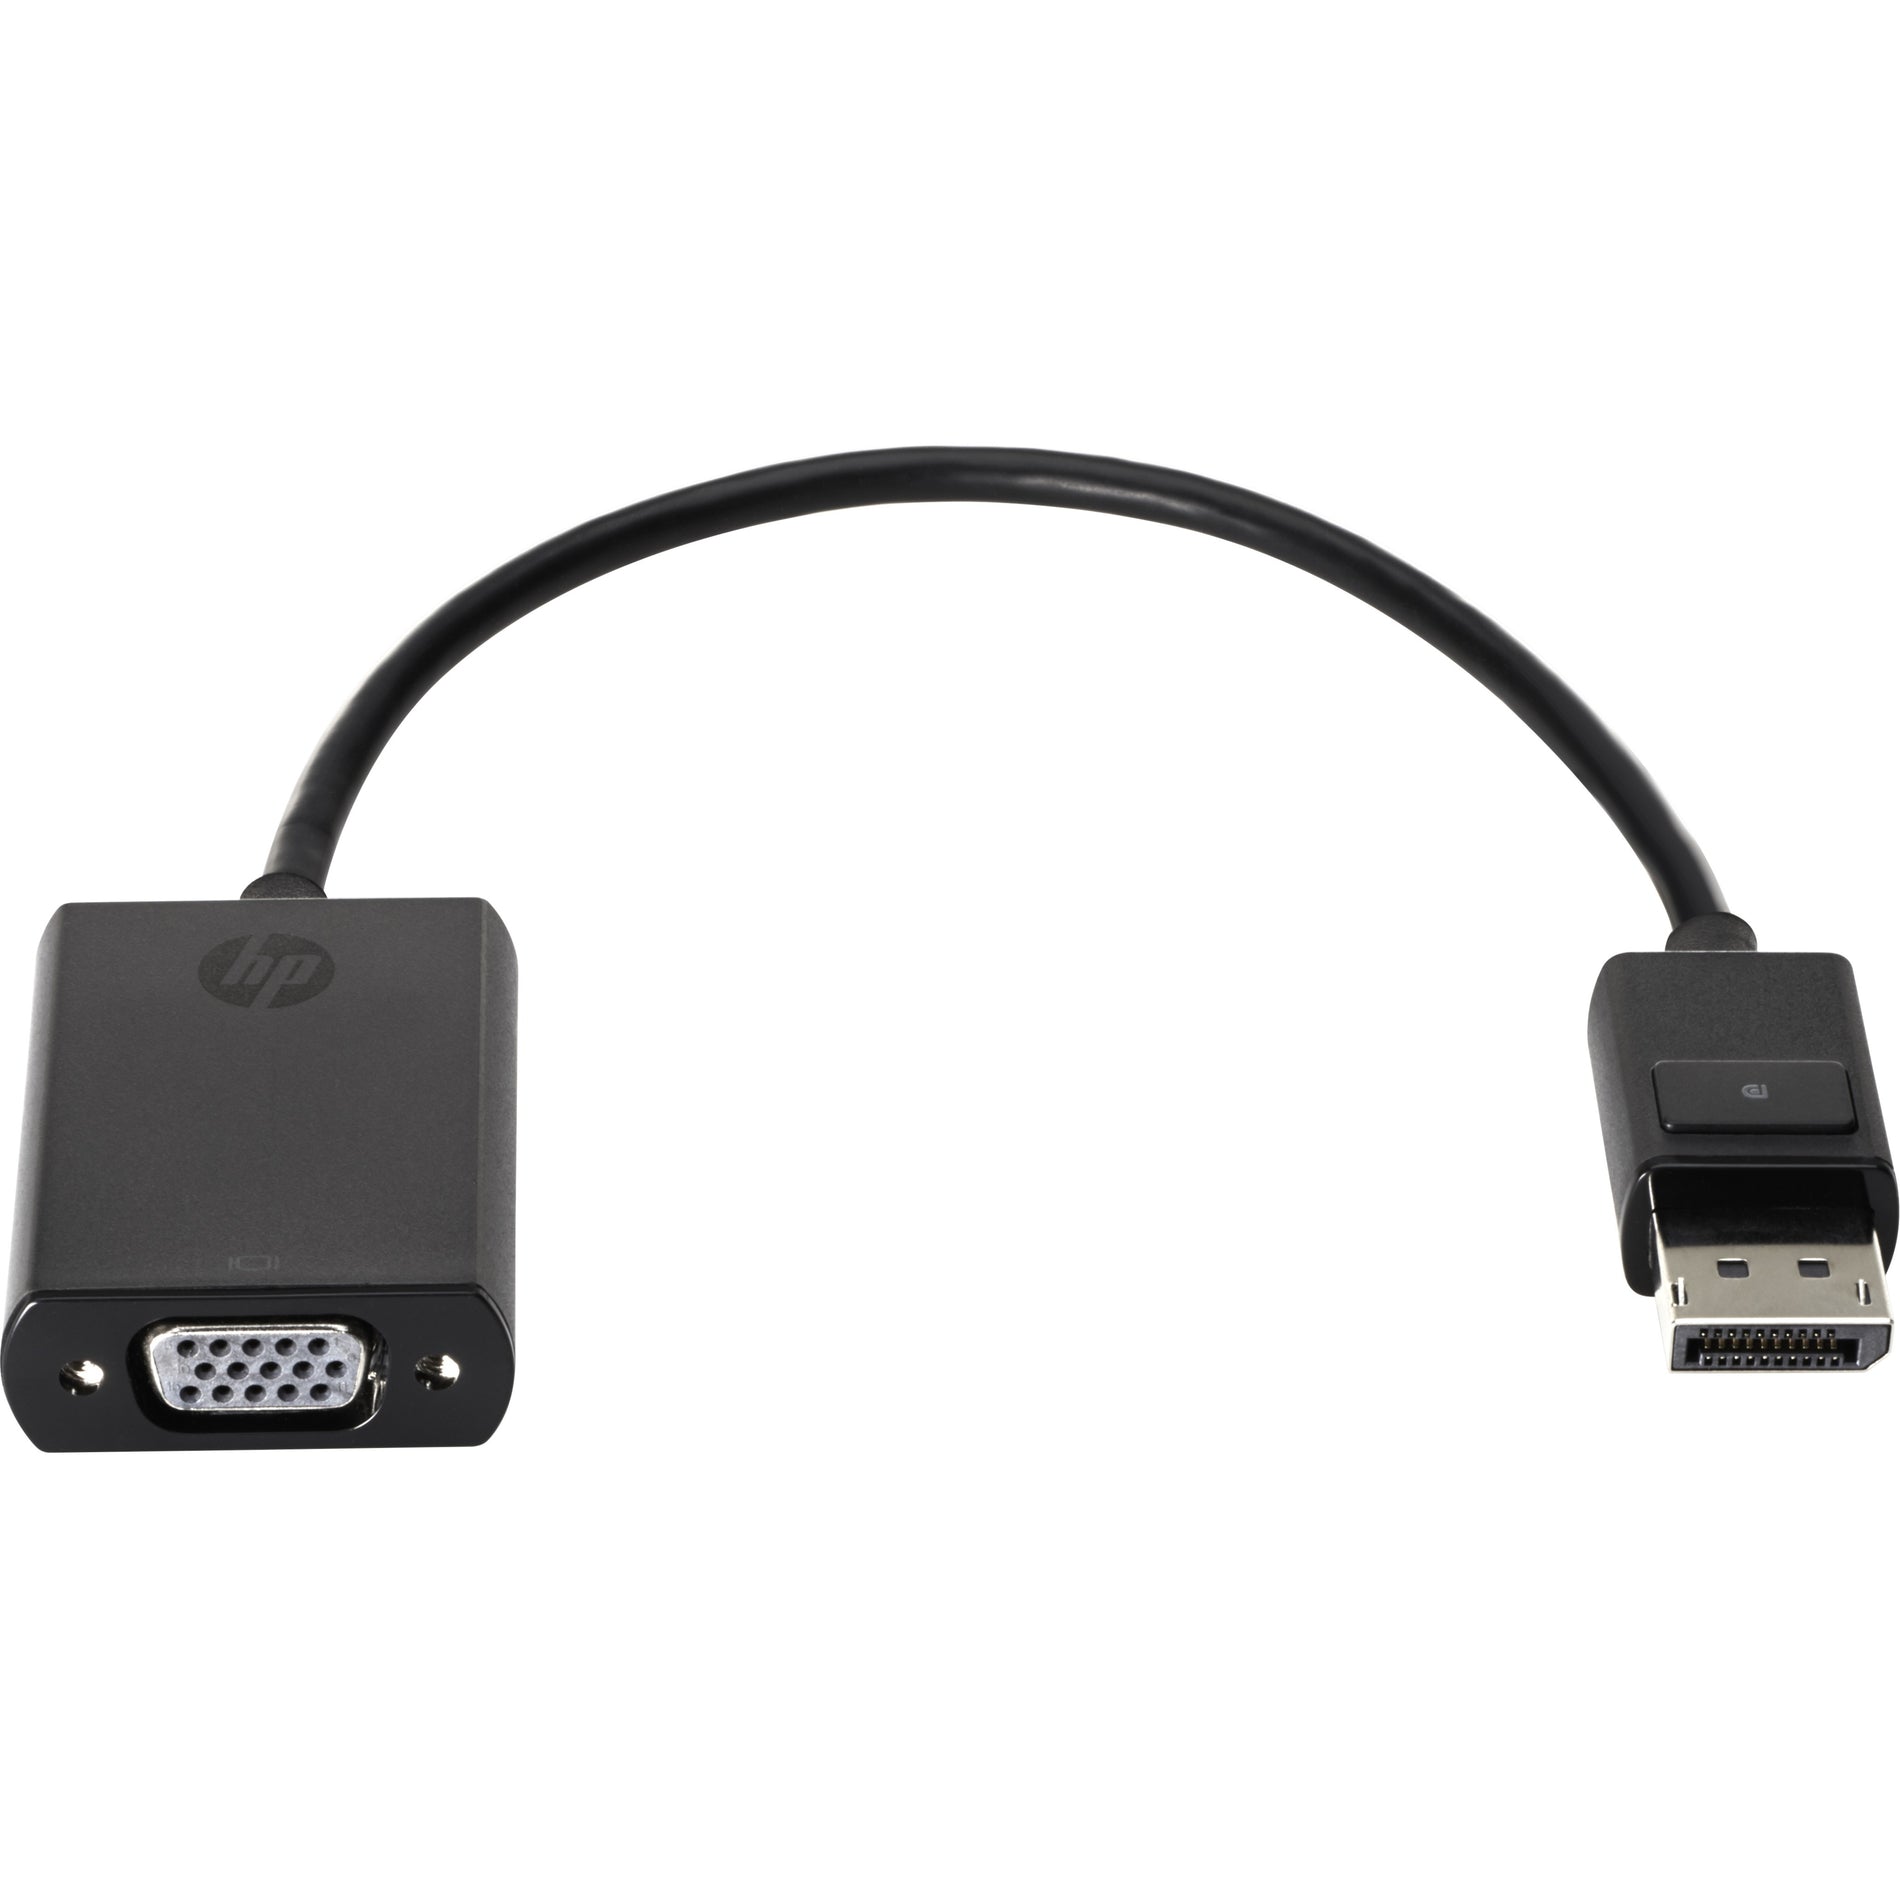 HP F7W97AA DisplayPort To VGA Adapter, Connect Your DisplayPort Device to a VGA Monitor